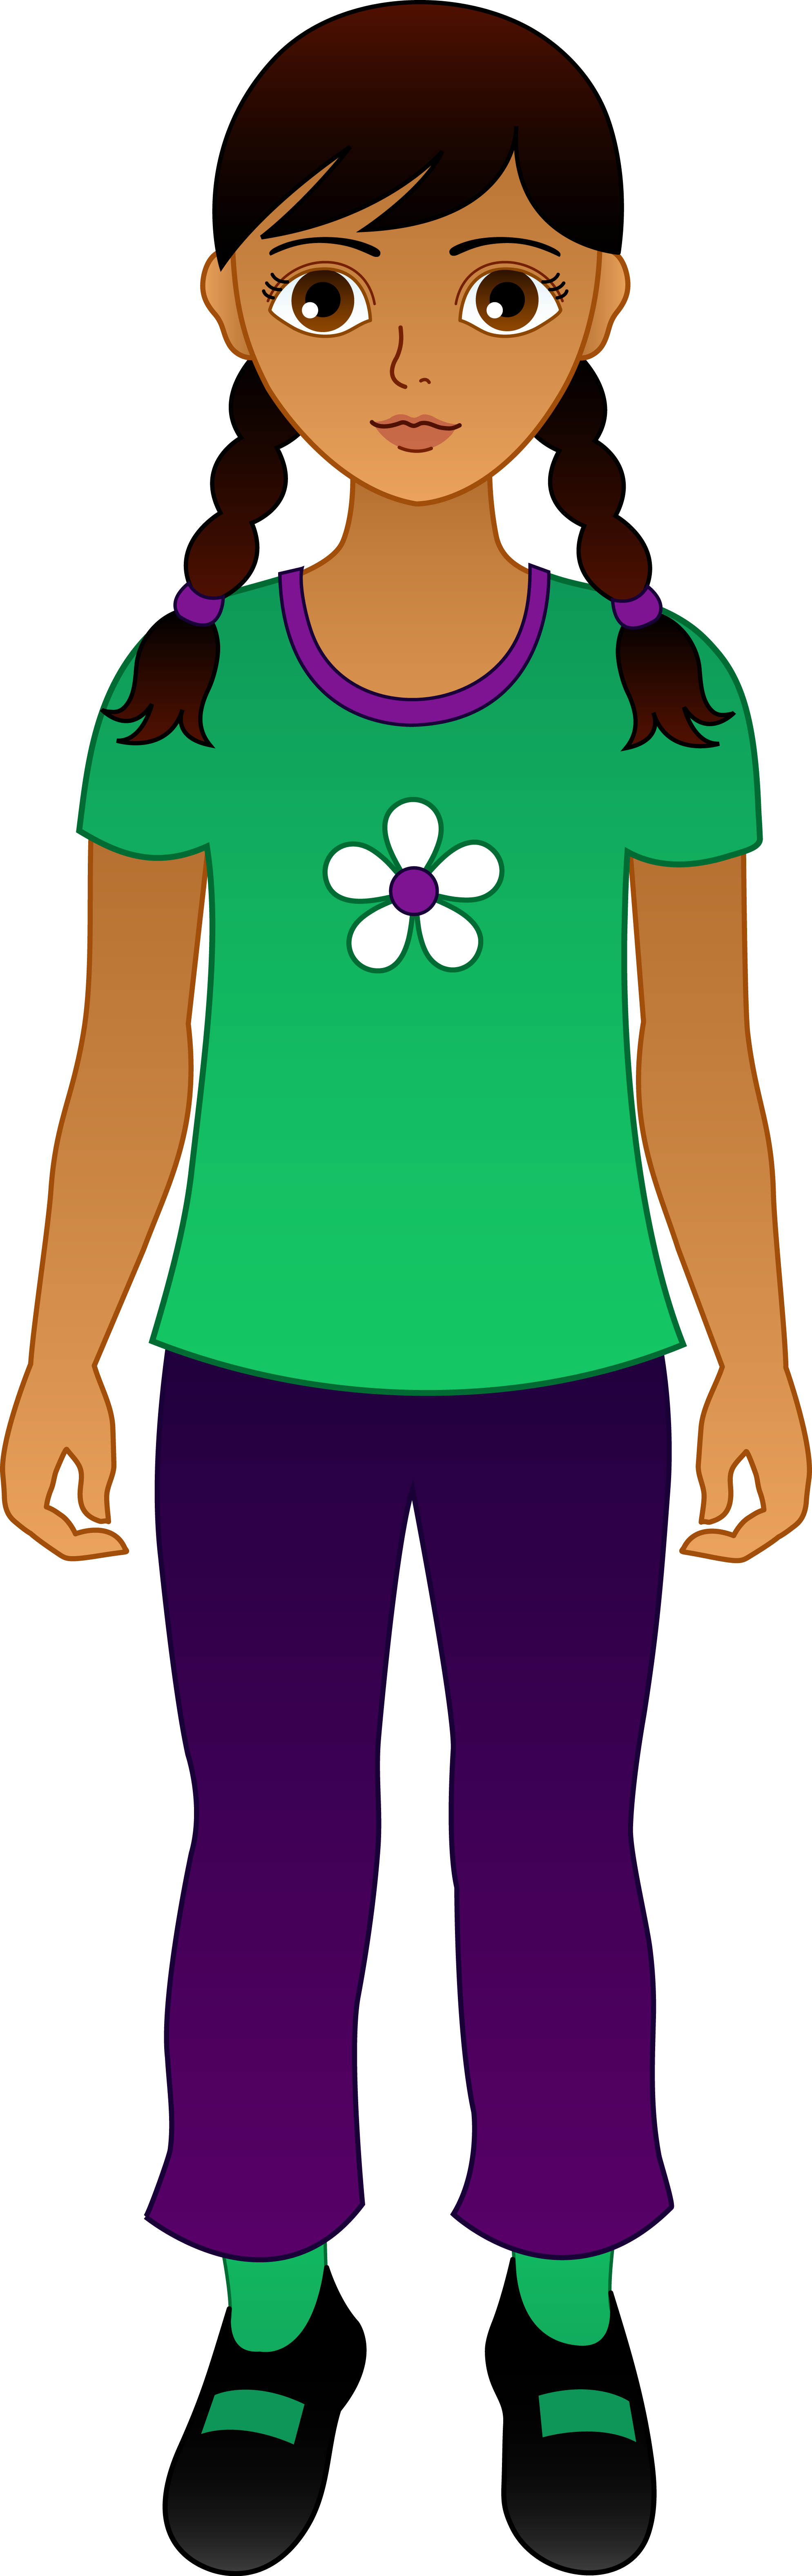 Girl with braids clipart.